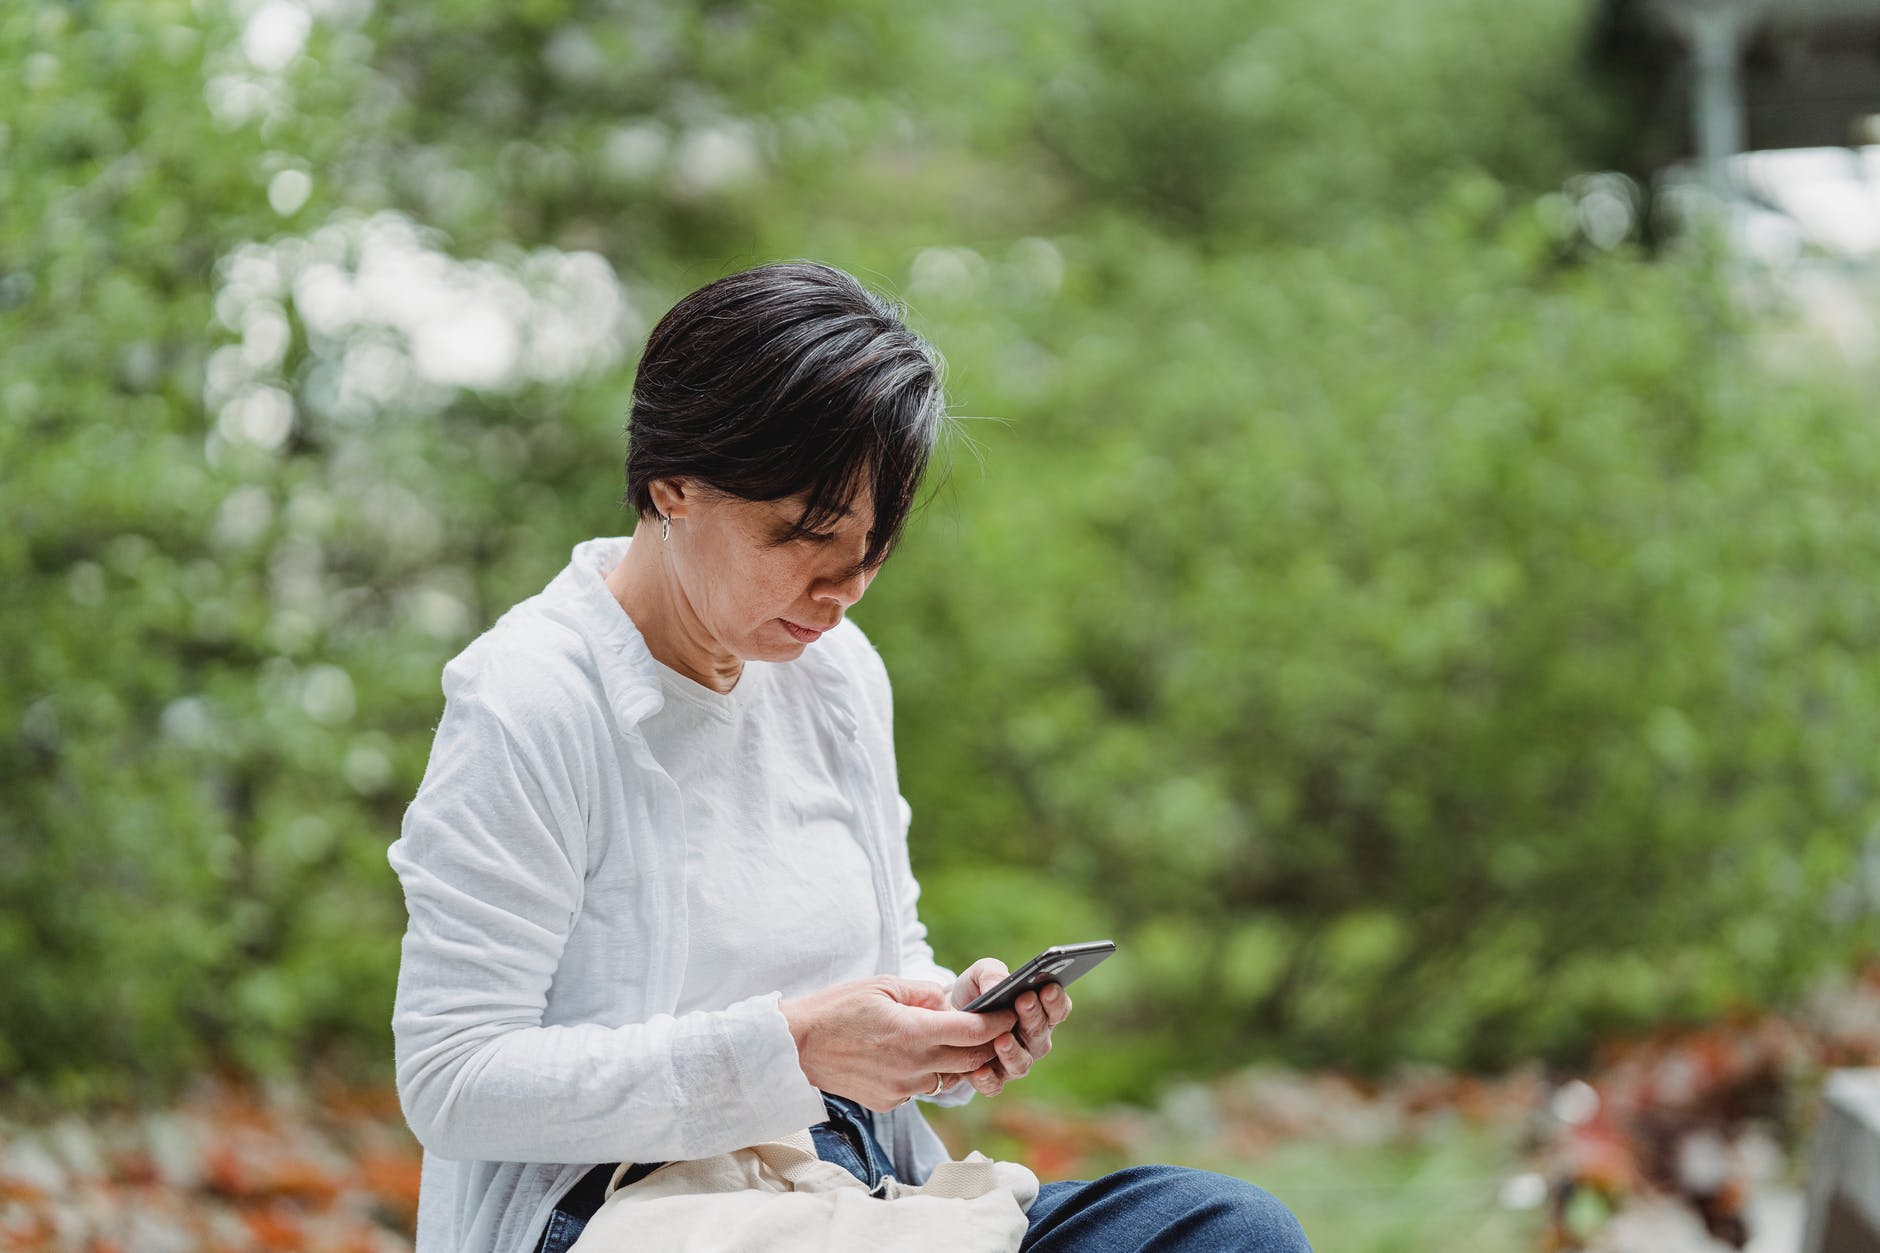 shallow focus photo of a woman using a smartphone